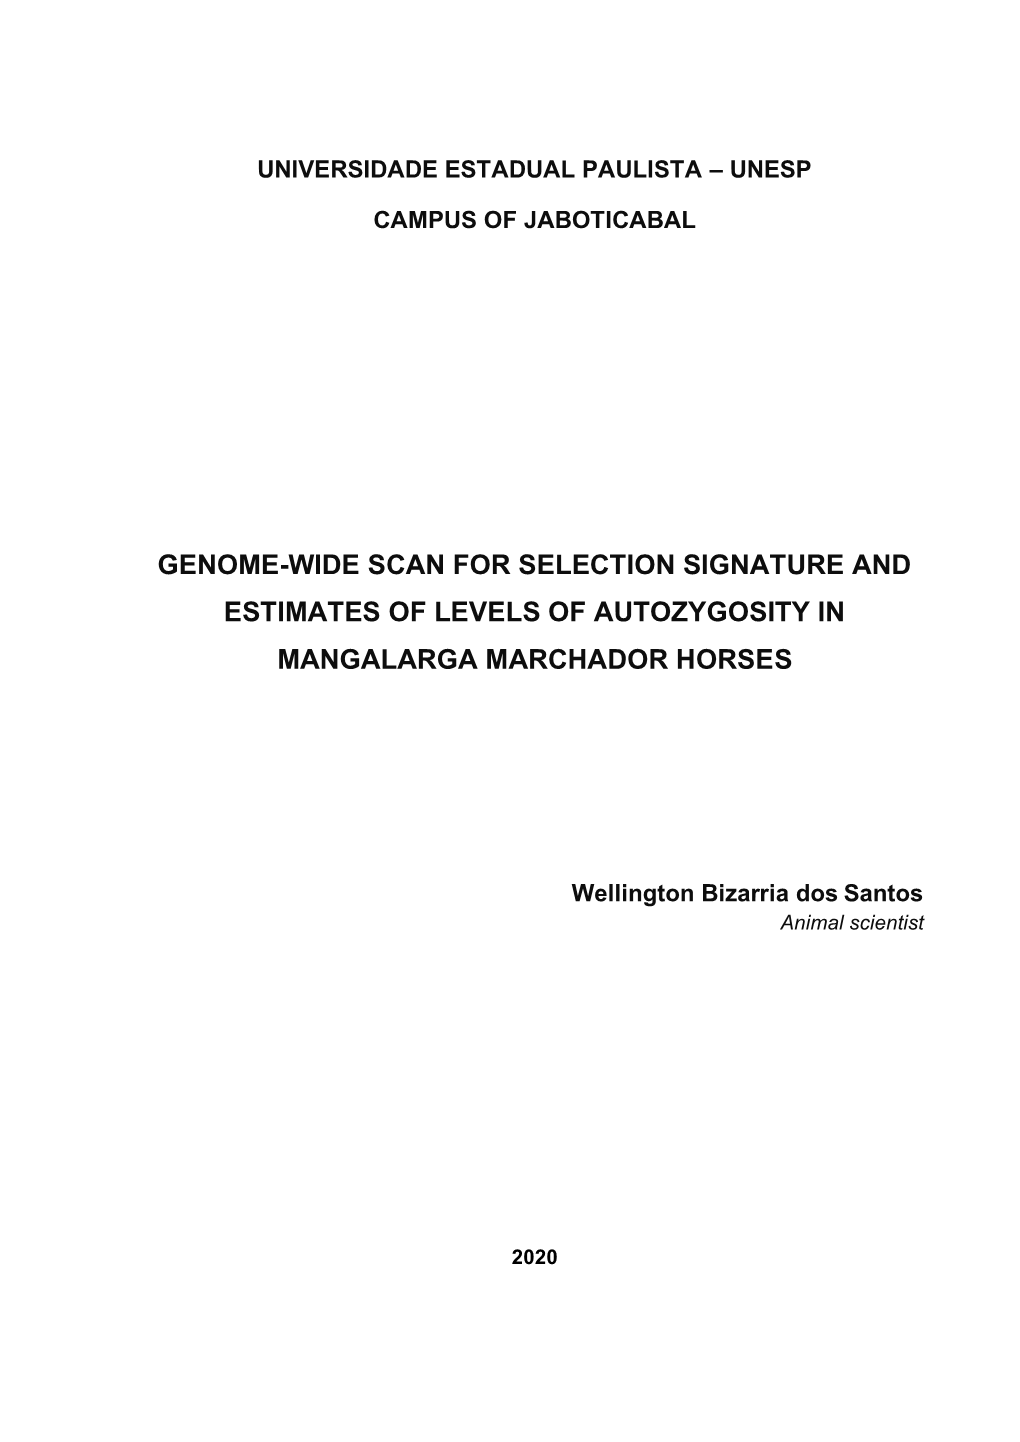 Genome-Wide Scan for Selection Signature and Estimates of Levels of Autozygosity in Mangalarga Marchador Horses